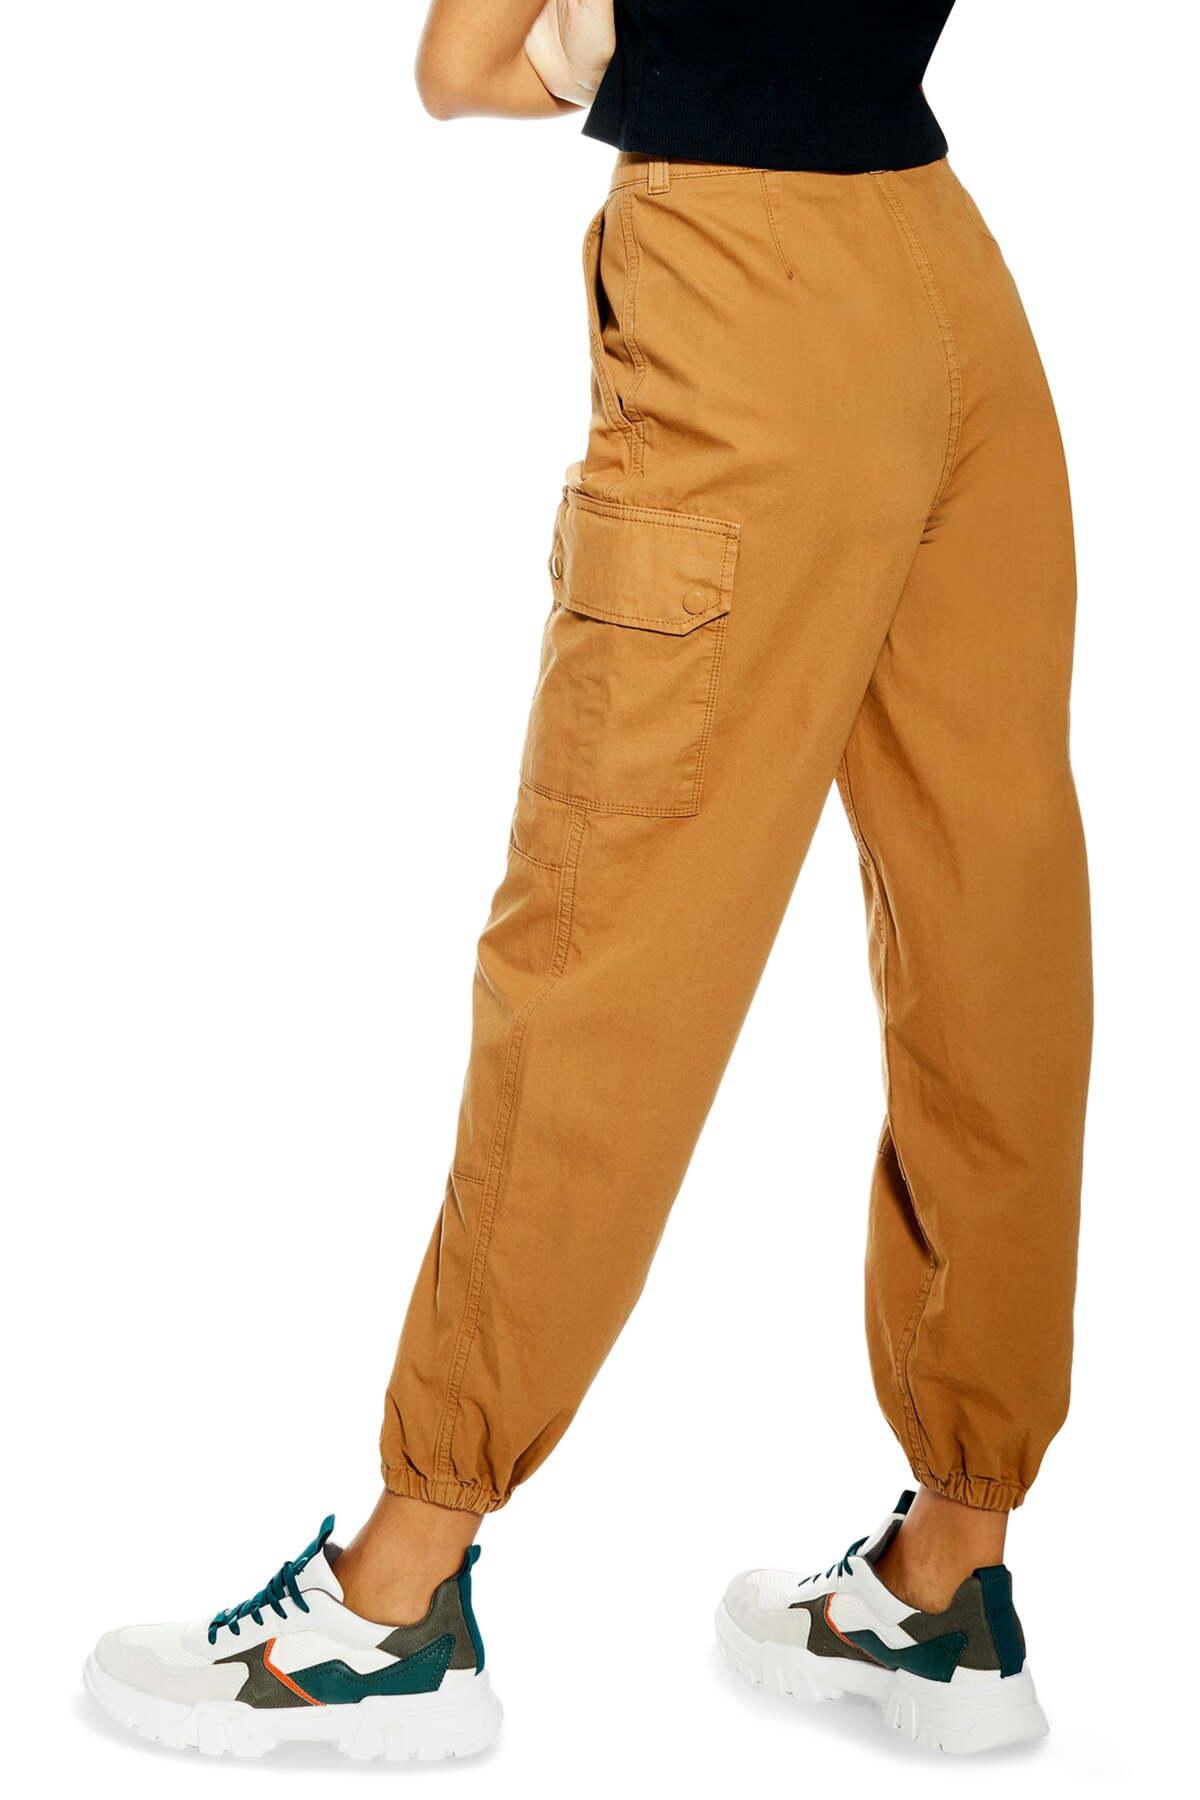 TOPSHOP Cotton Cuffed Utility Cargo Pants | Lyst